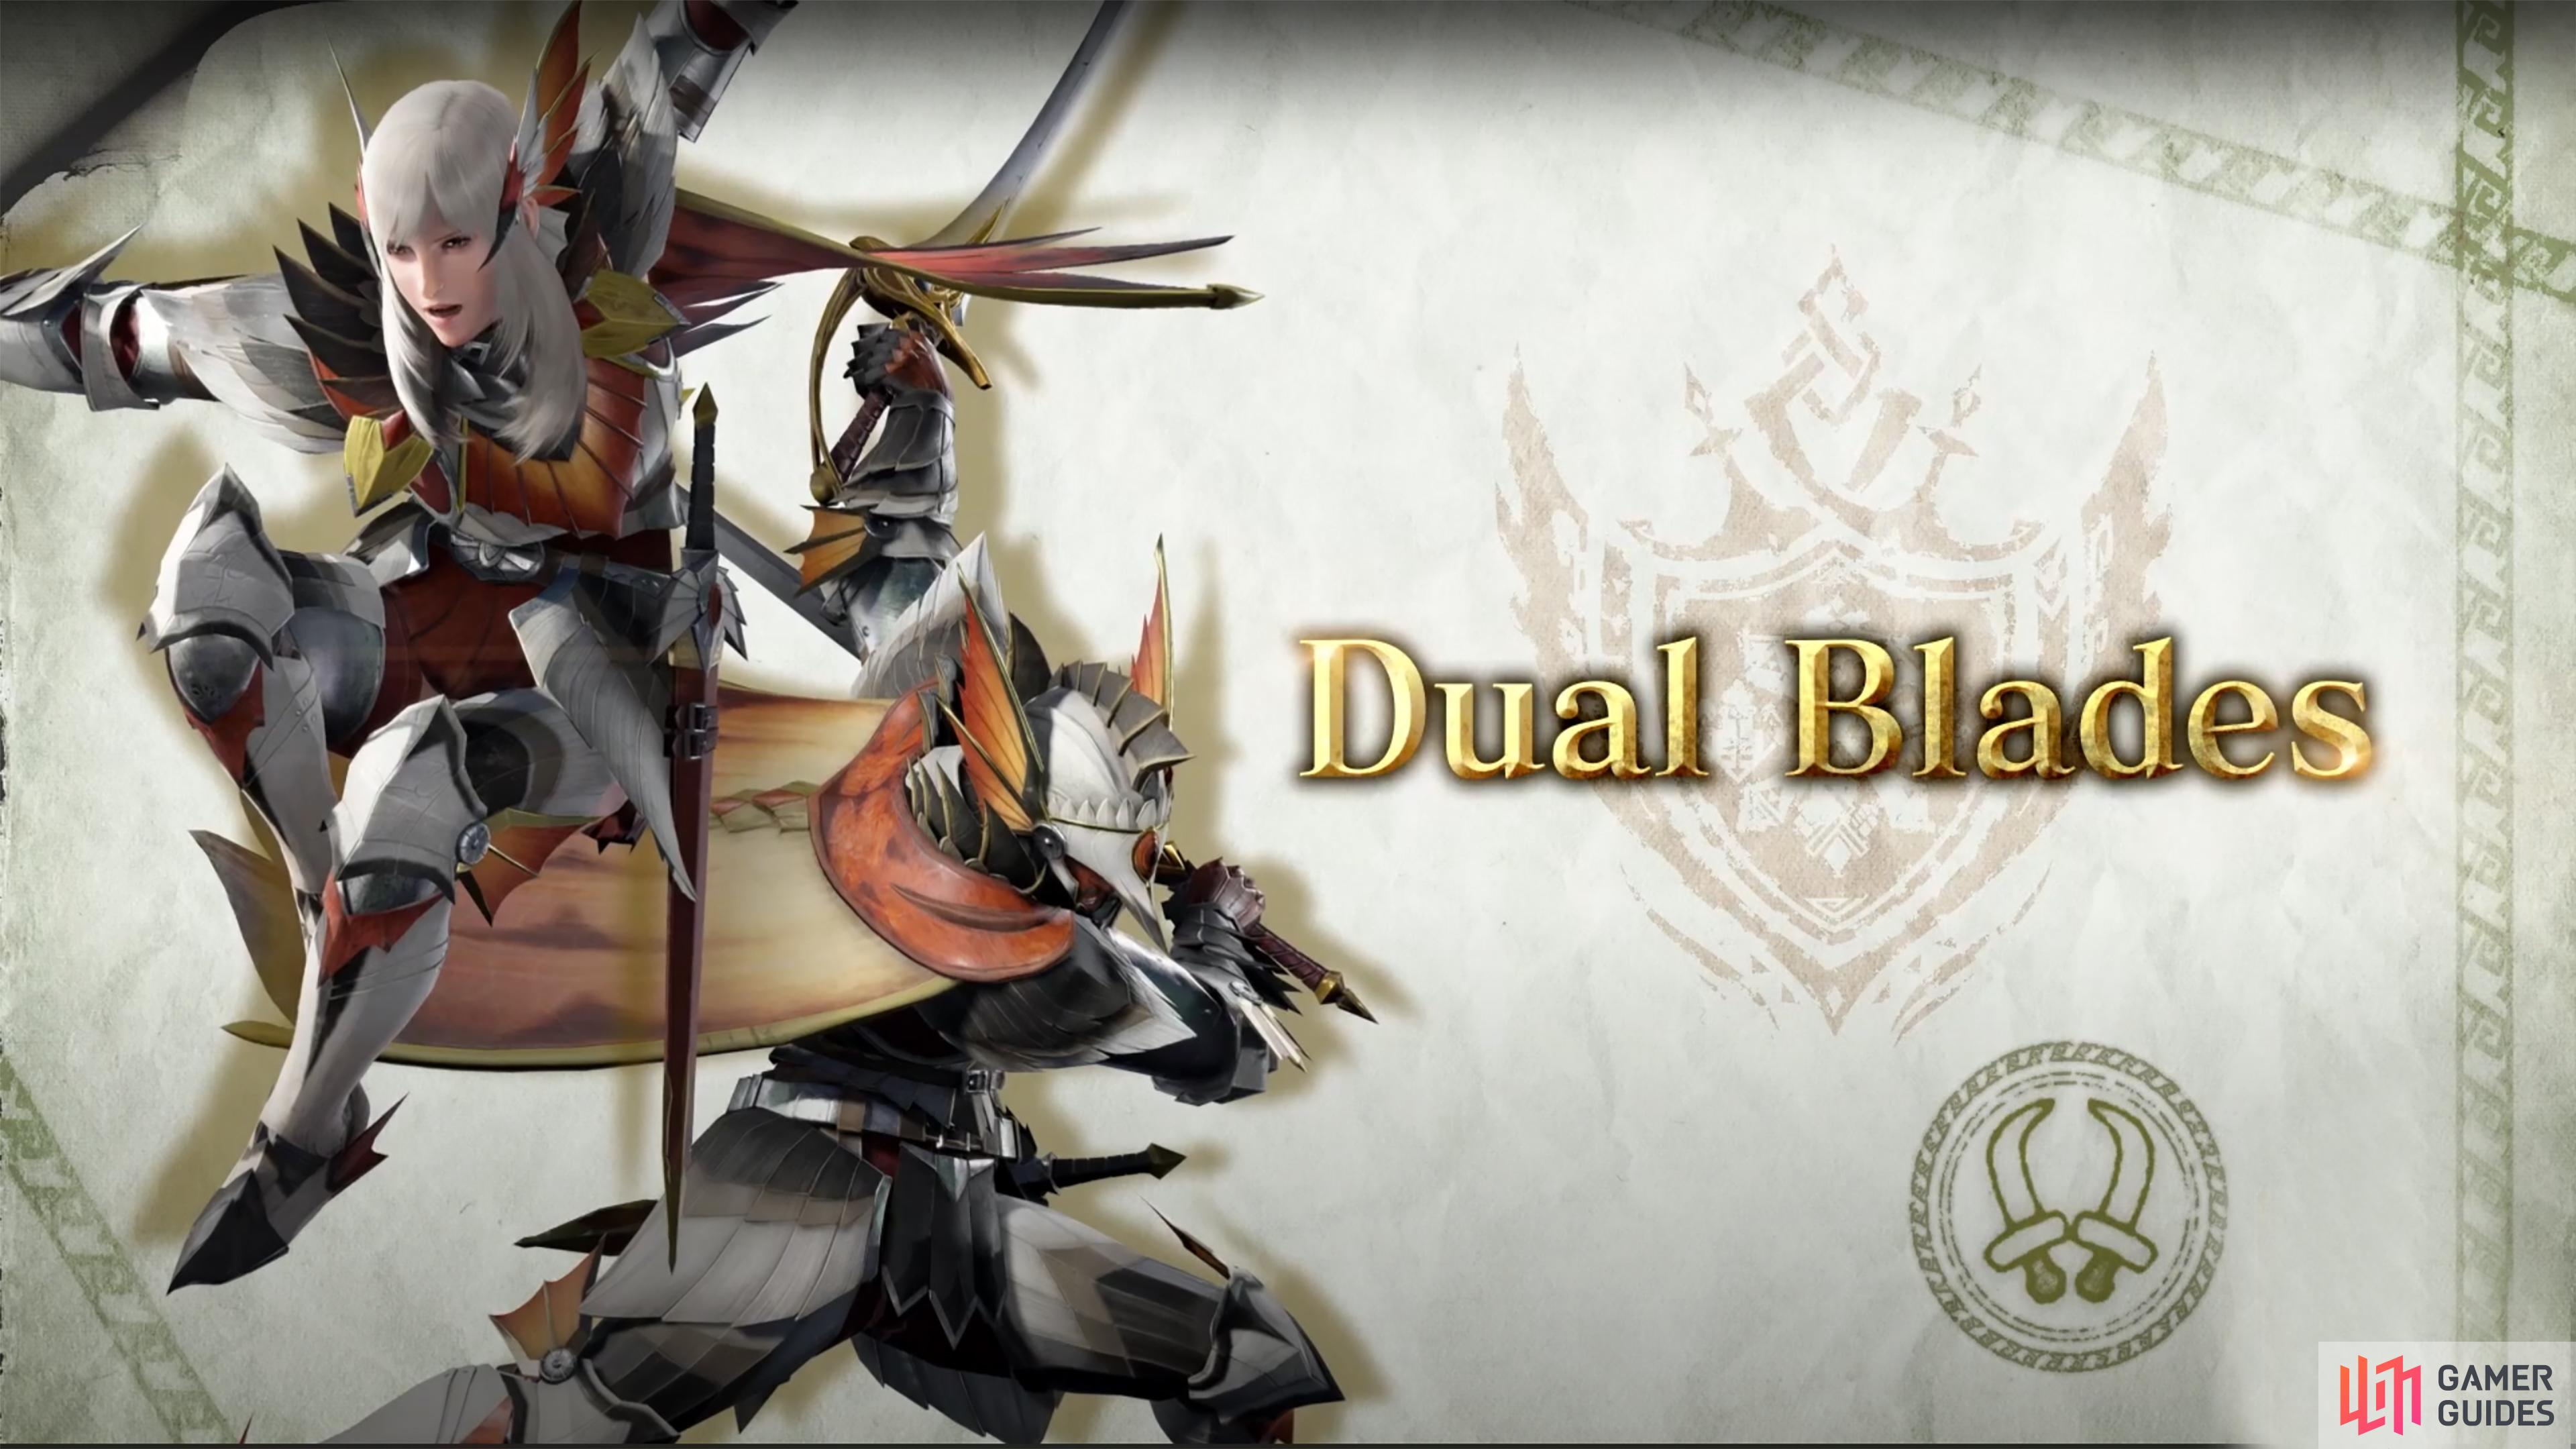 The Dual Blades are the quickest weapon in the game. Their fast attacks are ideal for status, and elemental effects.